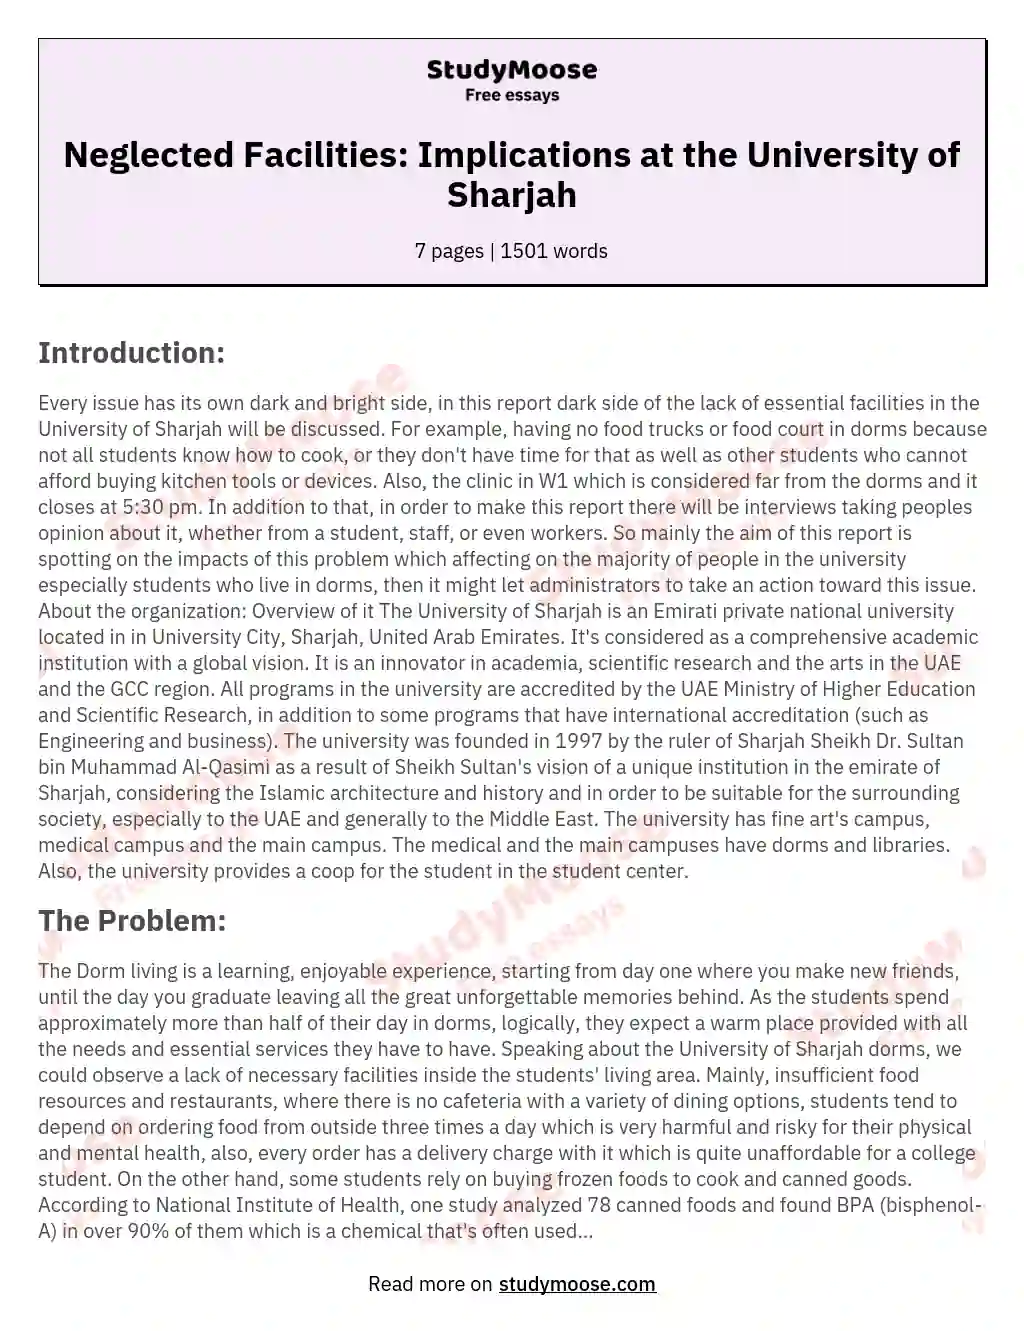 Neglected Facilities: Implications at the University of Sharjah essay